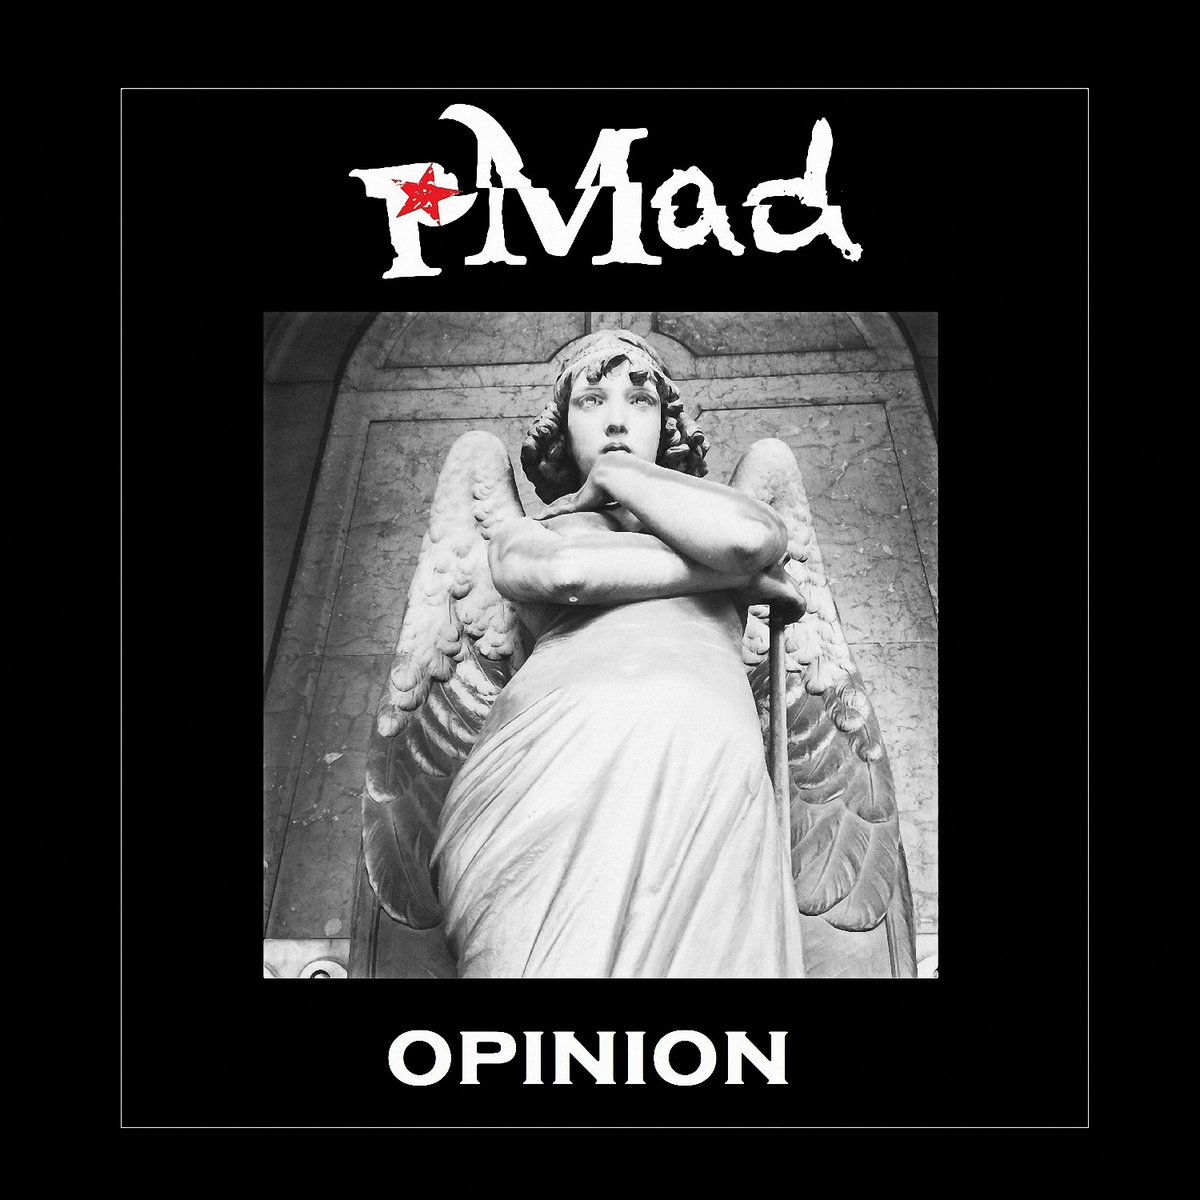 LISTEN: “Opinion” by pMad